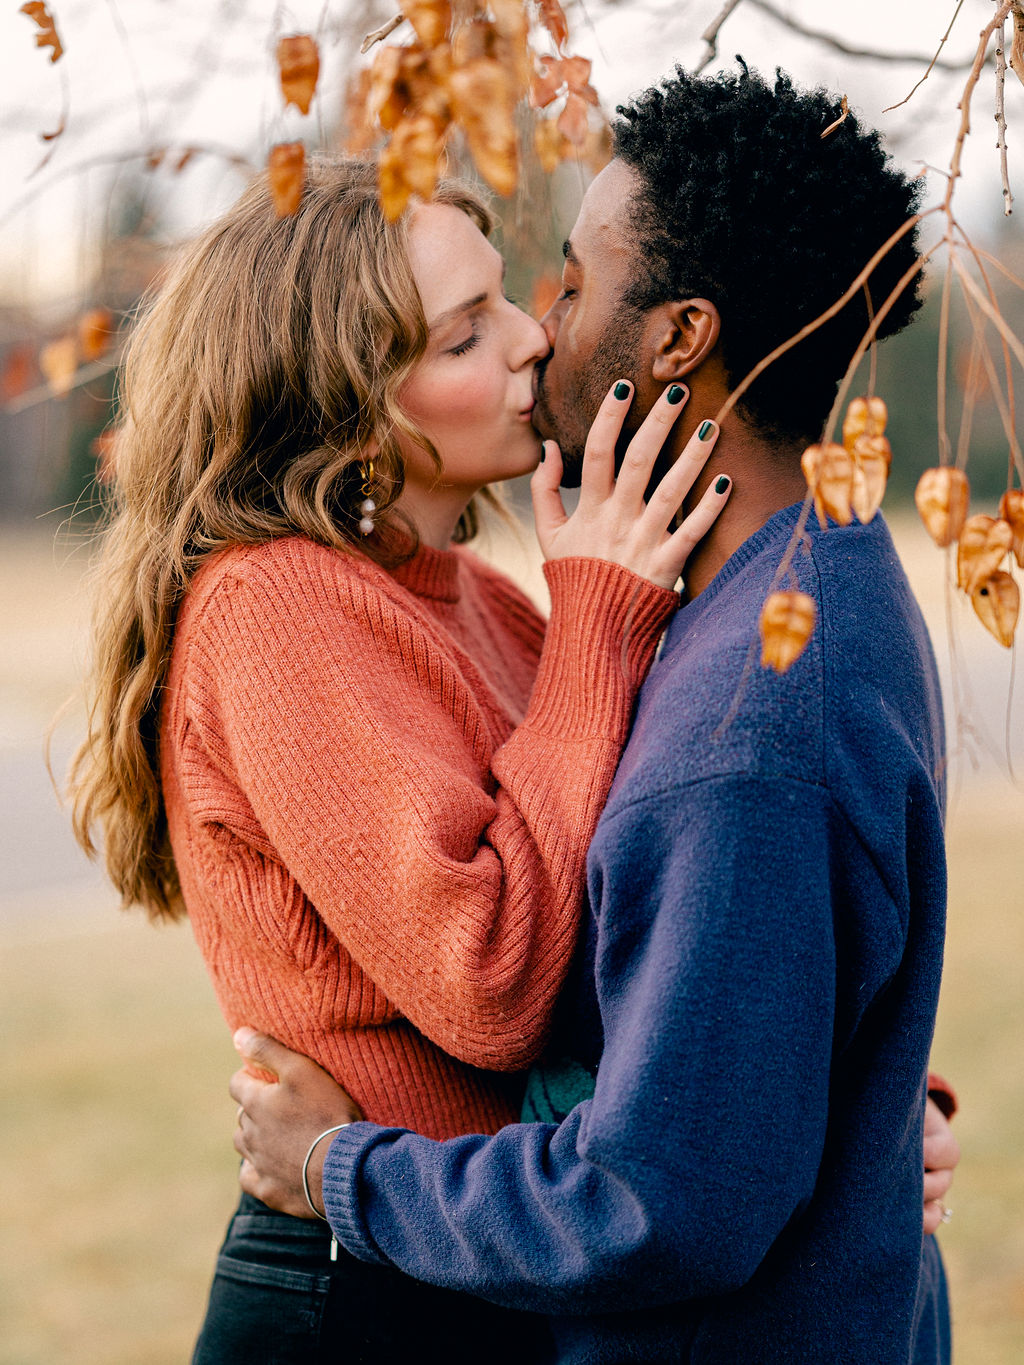 A couple kisses, holding each other close under a tree in a park. It is winter, so the leaves on the tree are brown.